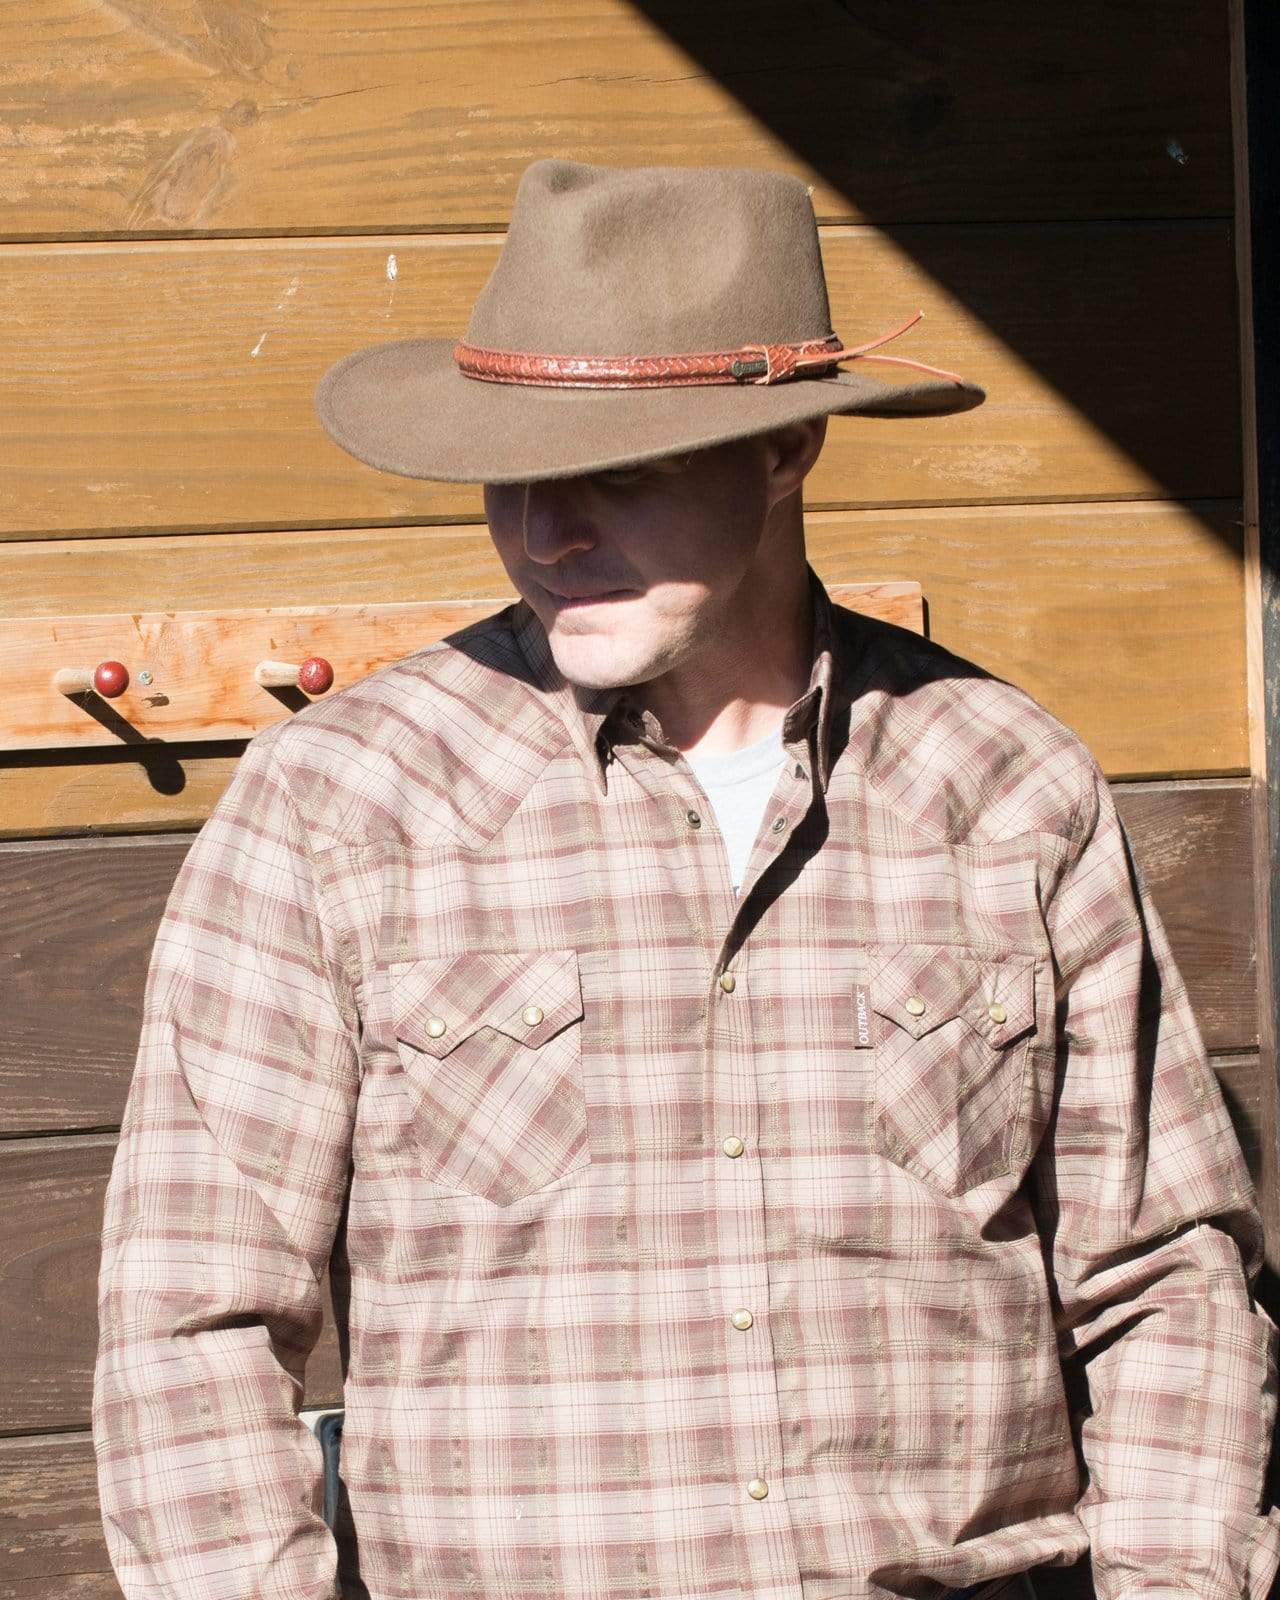 Outback Trading Company Dusty Rider Hats